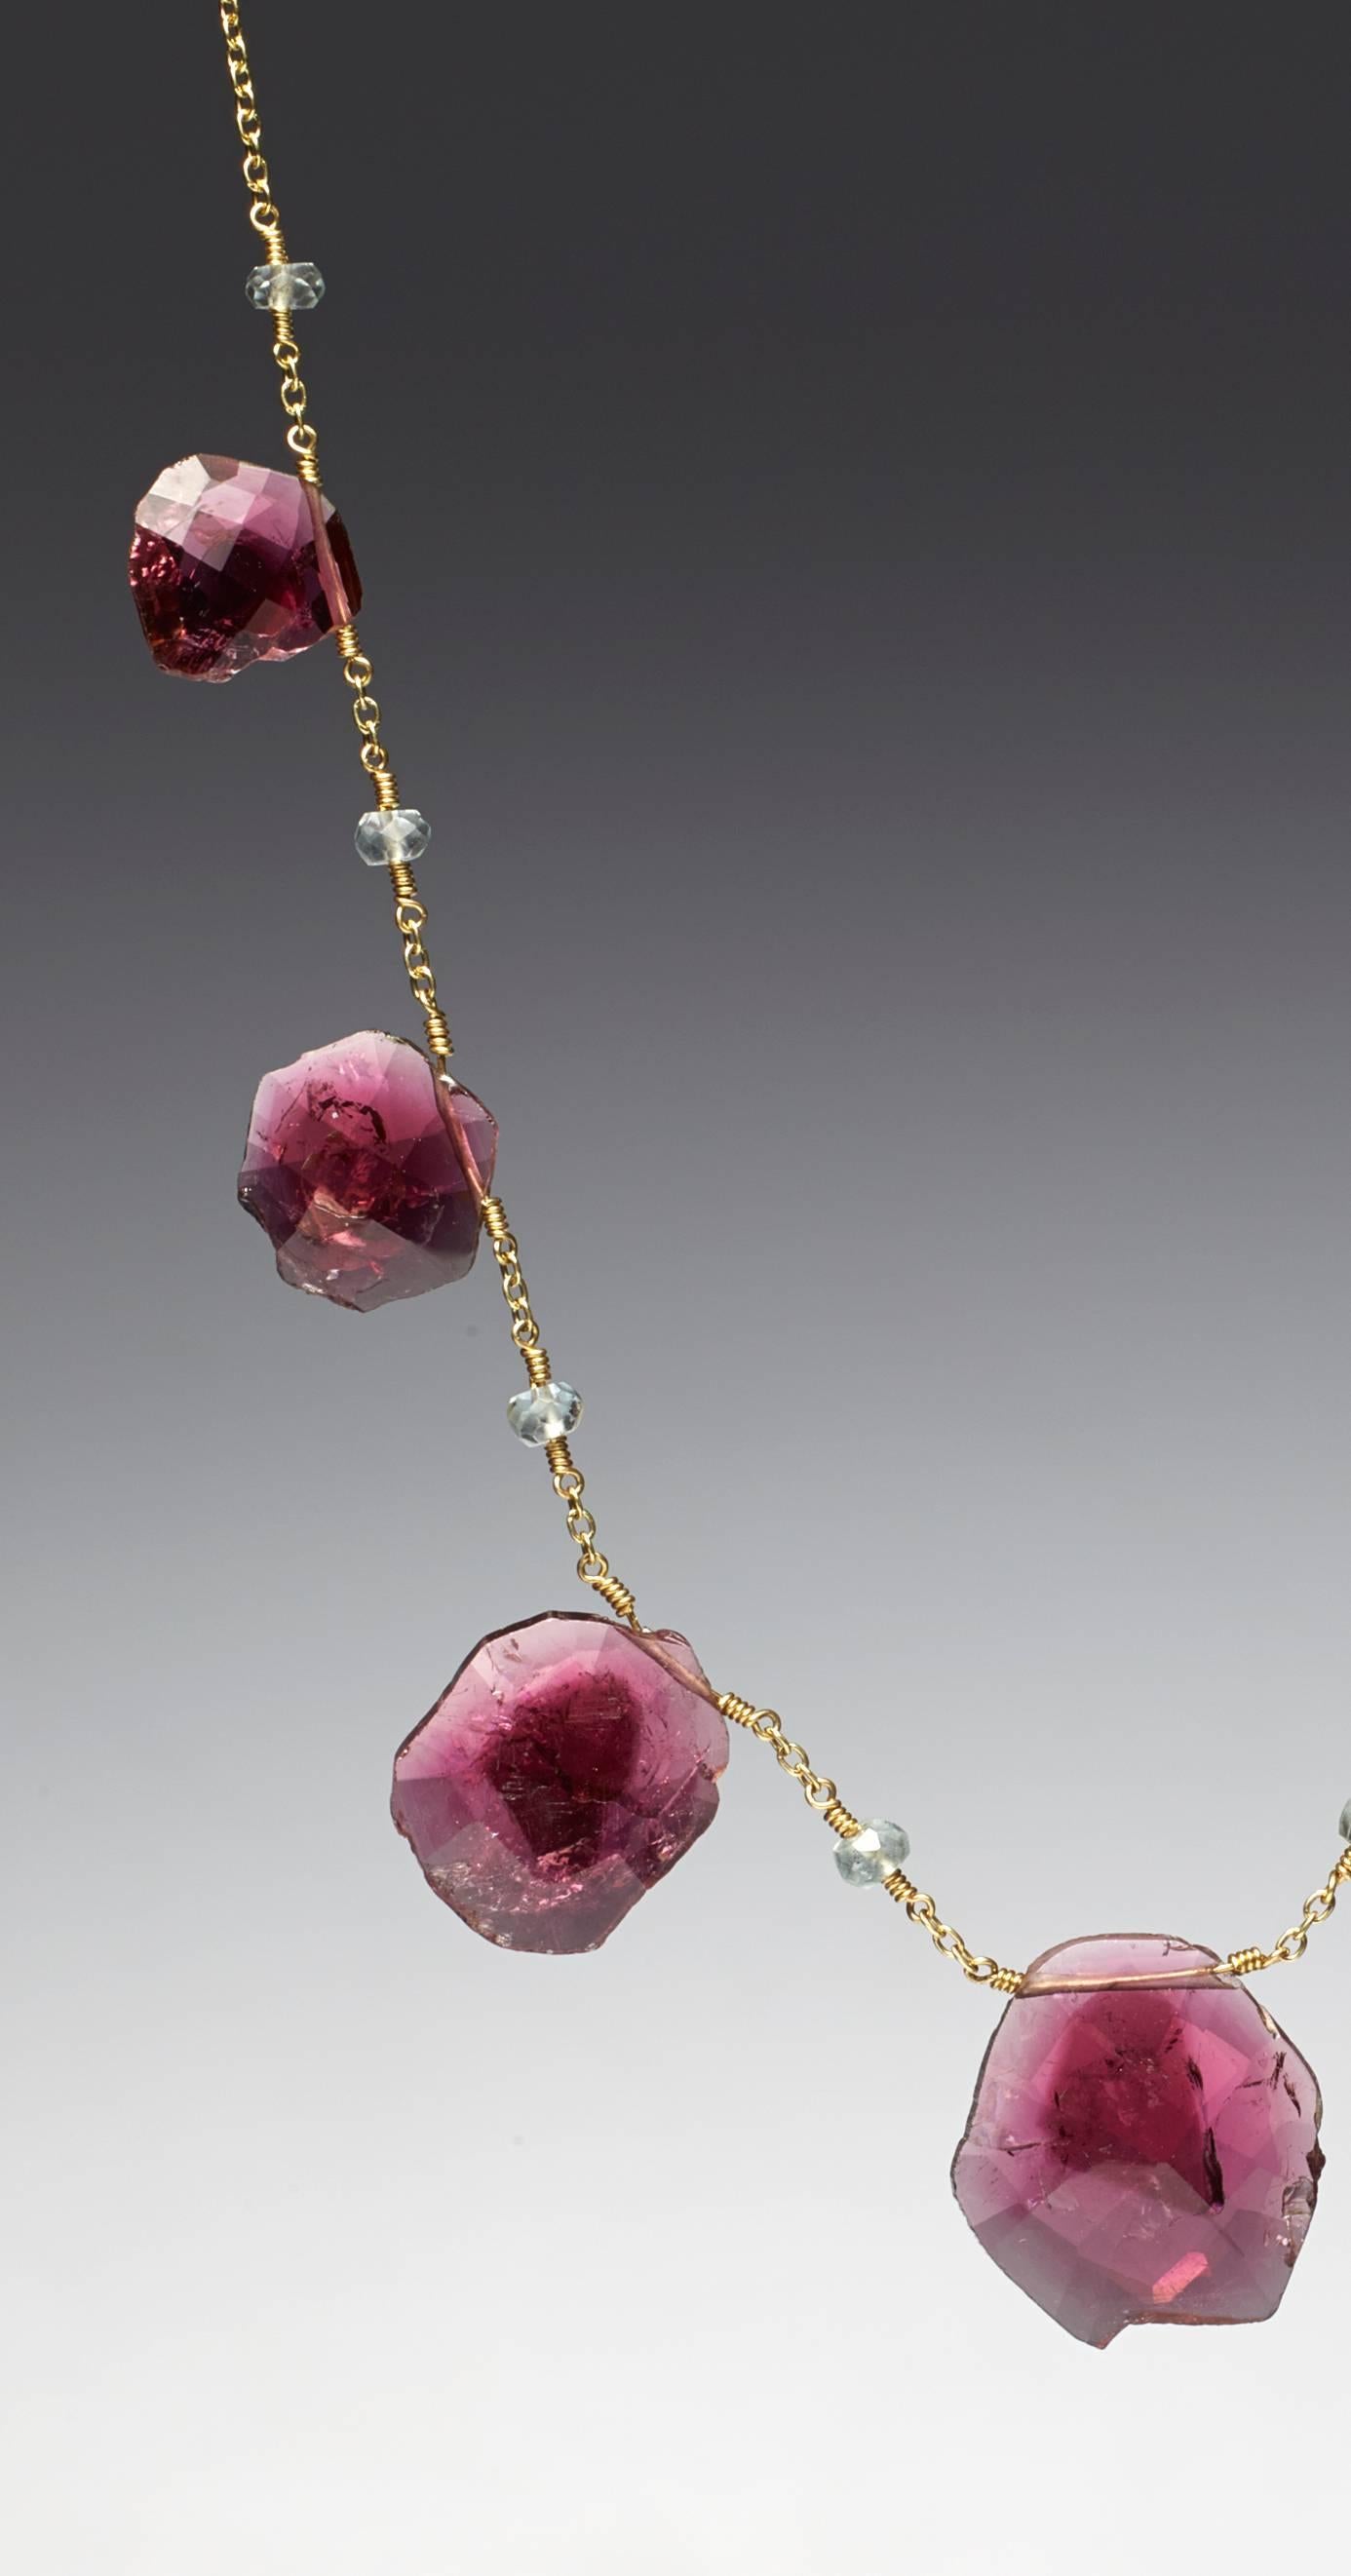 Pink tourmaline slice necklace, accented with 3.5 x 4 mm aquamarine beads. One of a kind made in 18k gold. 44.40 carats pink tourmaline. Length of necklaces 23 inches